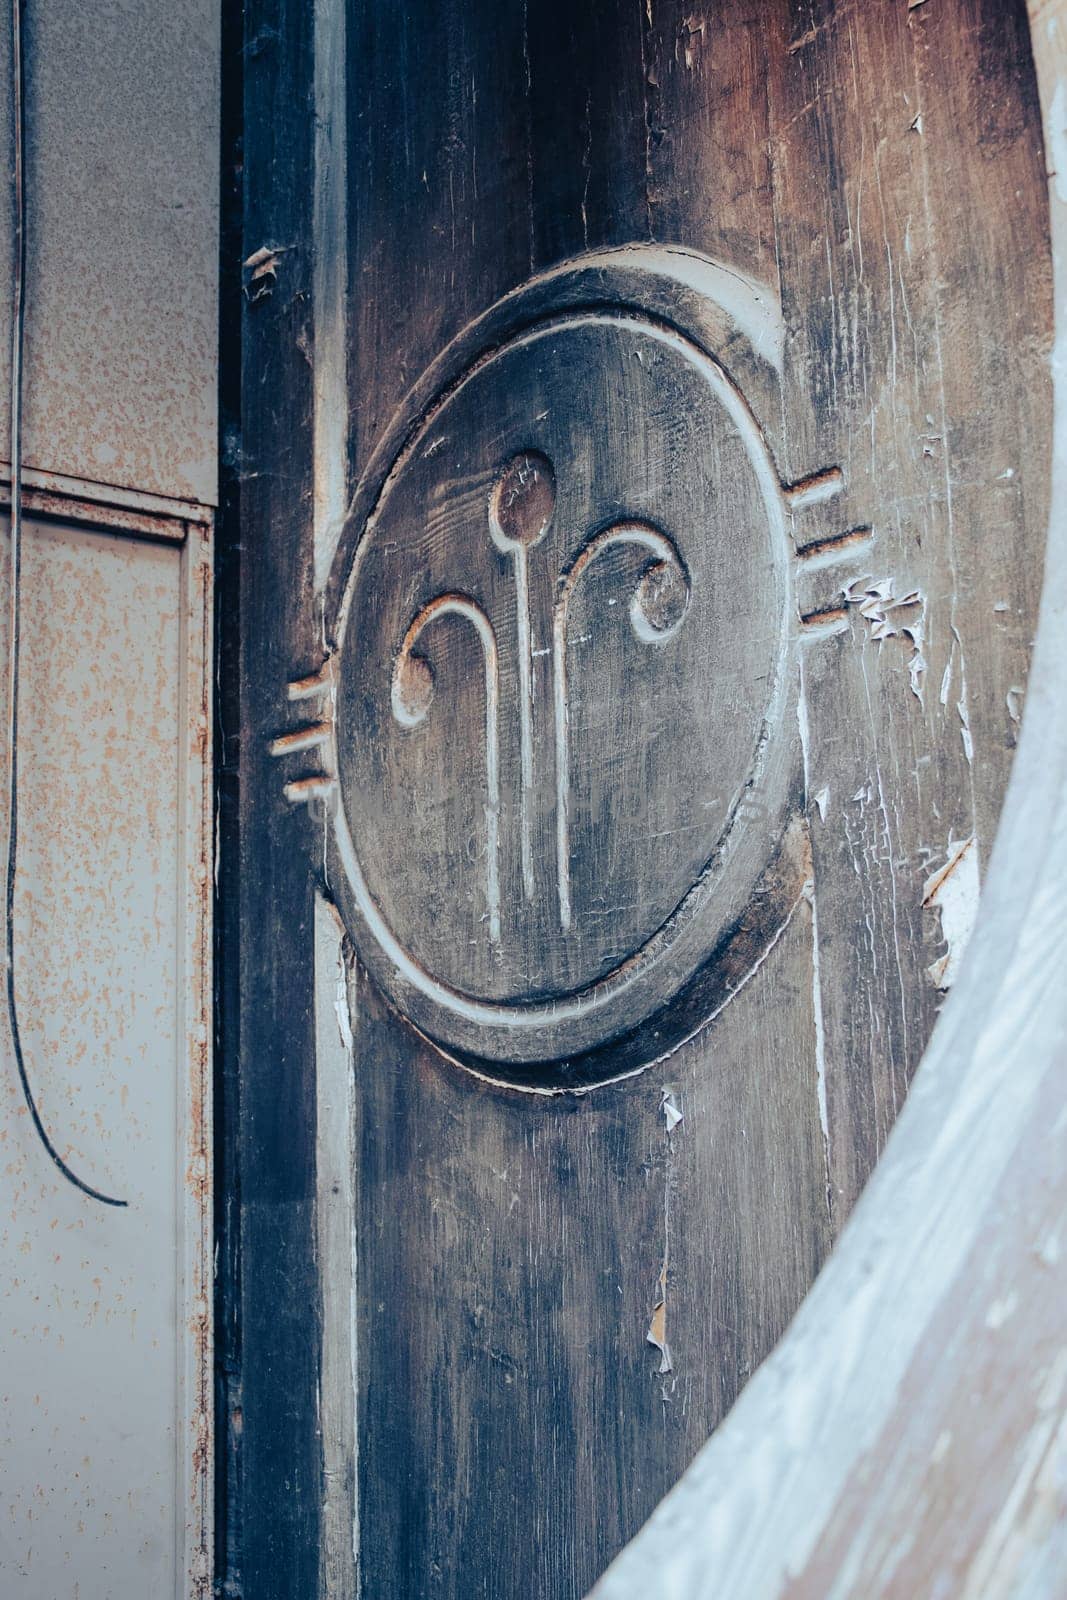 Close up decorative element of a wooden door concept photo. Urban architectural photography. High quality picture of historical building element